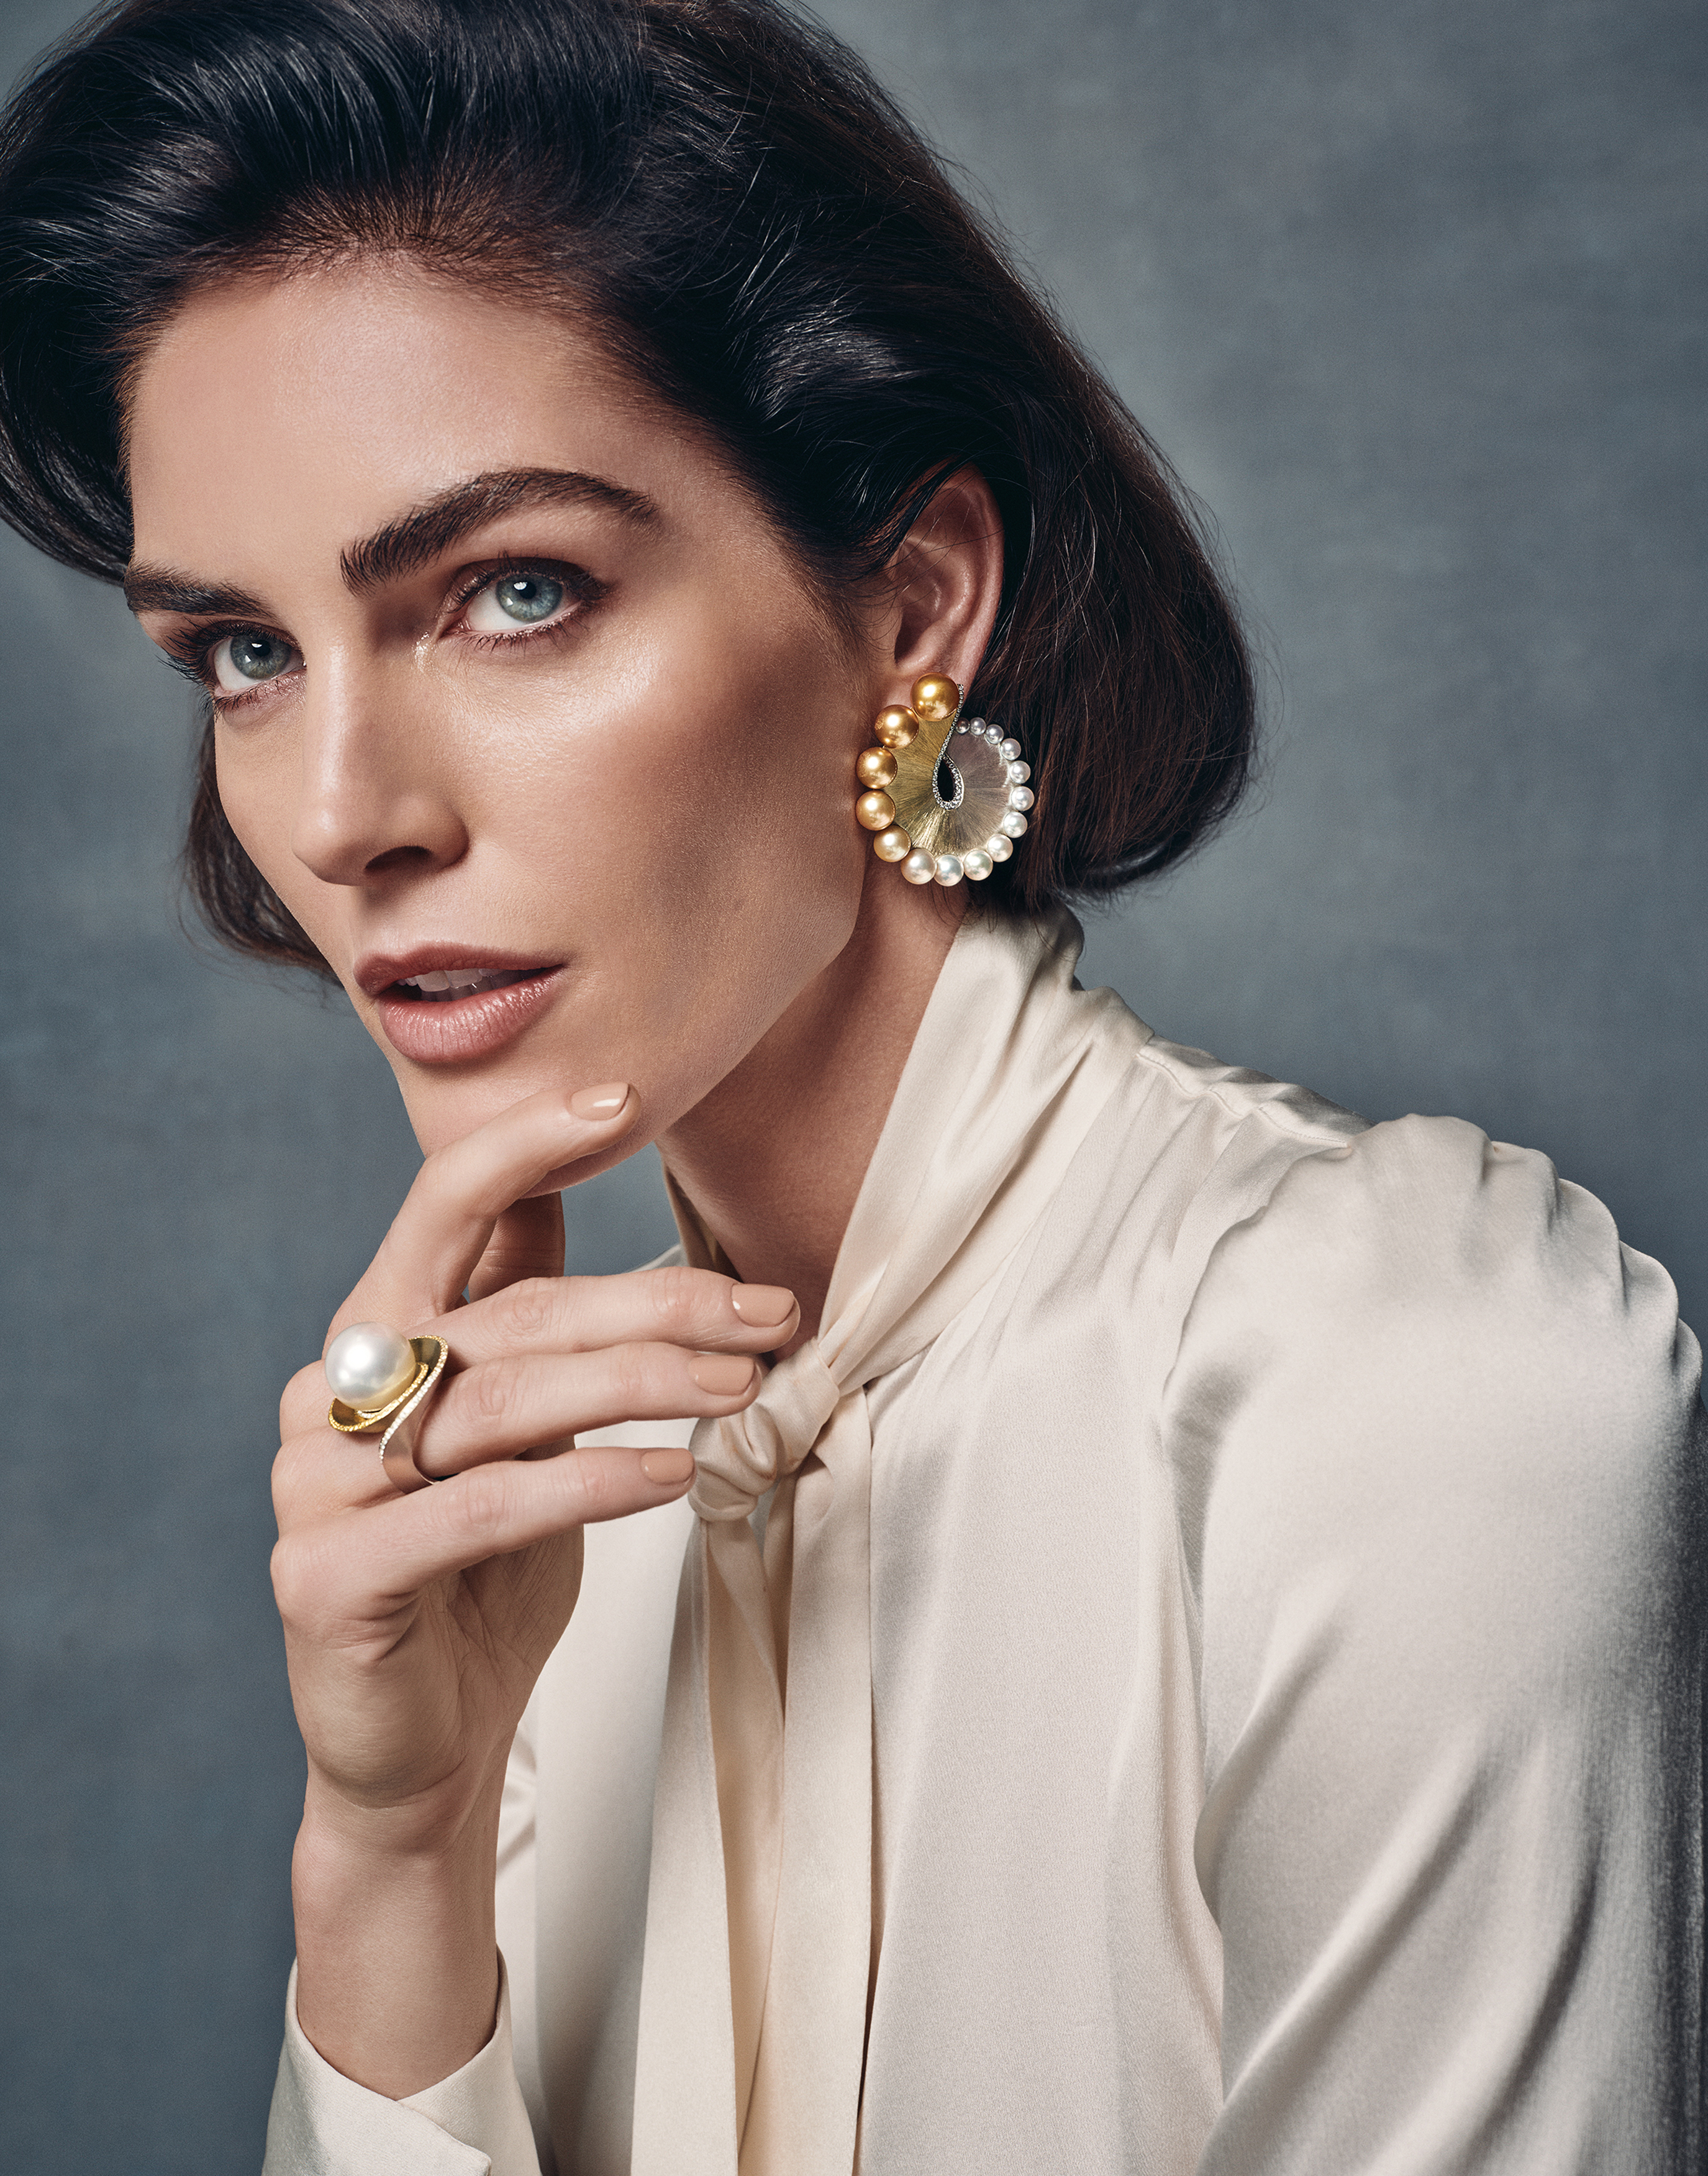 Nautilus Earrings & Avalon Ring - High Jewelry by Adam Neeley